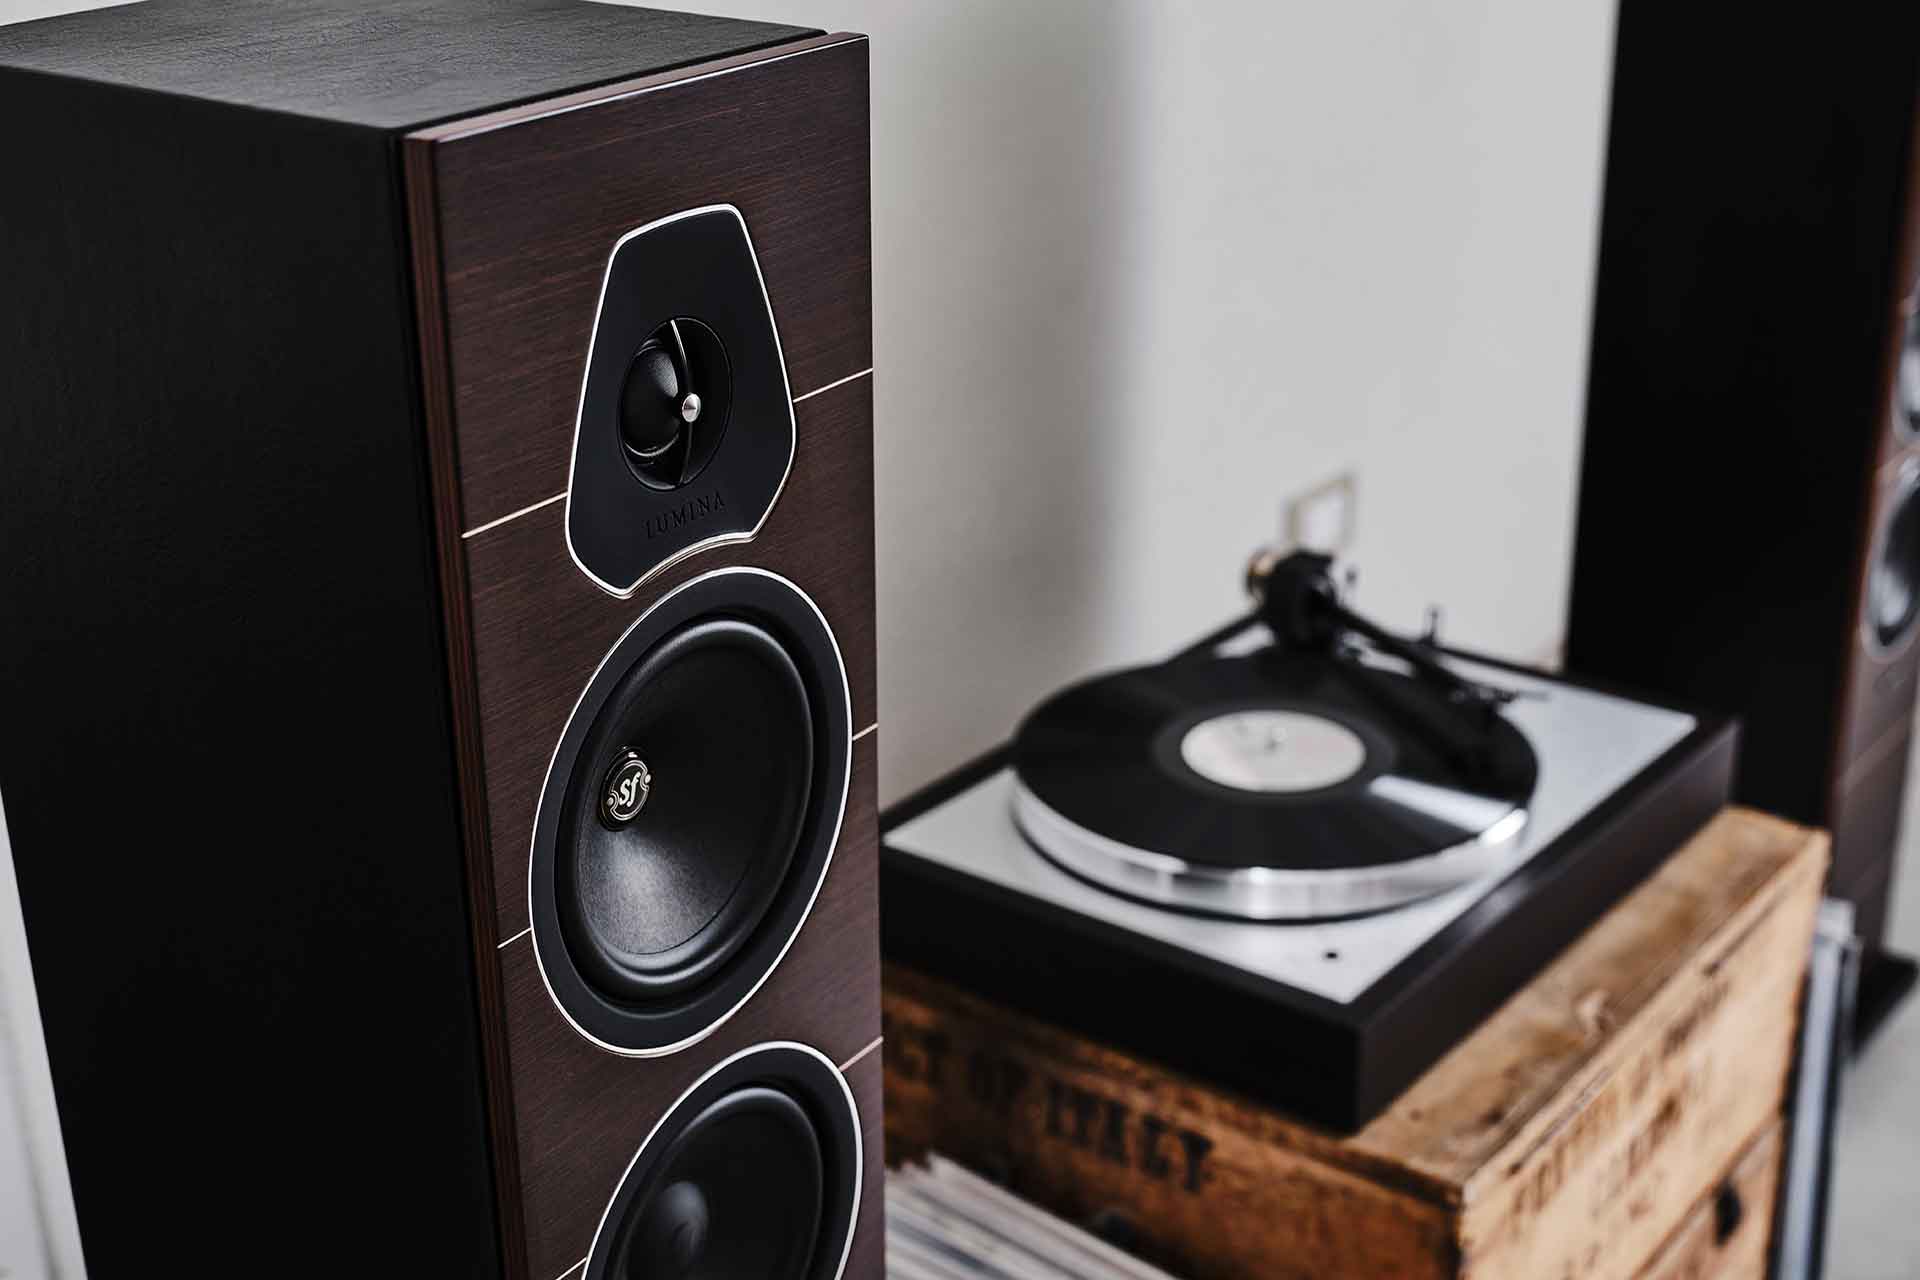 Sonus faber's new Lumina speaker collection offers affordable